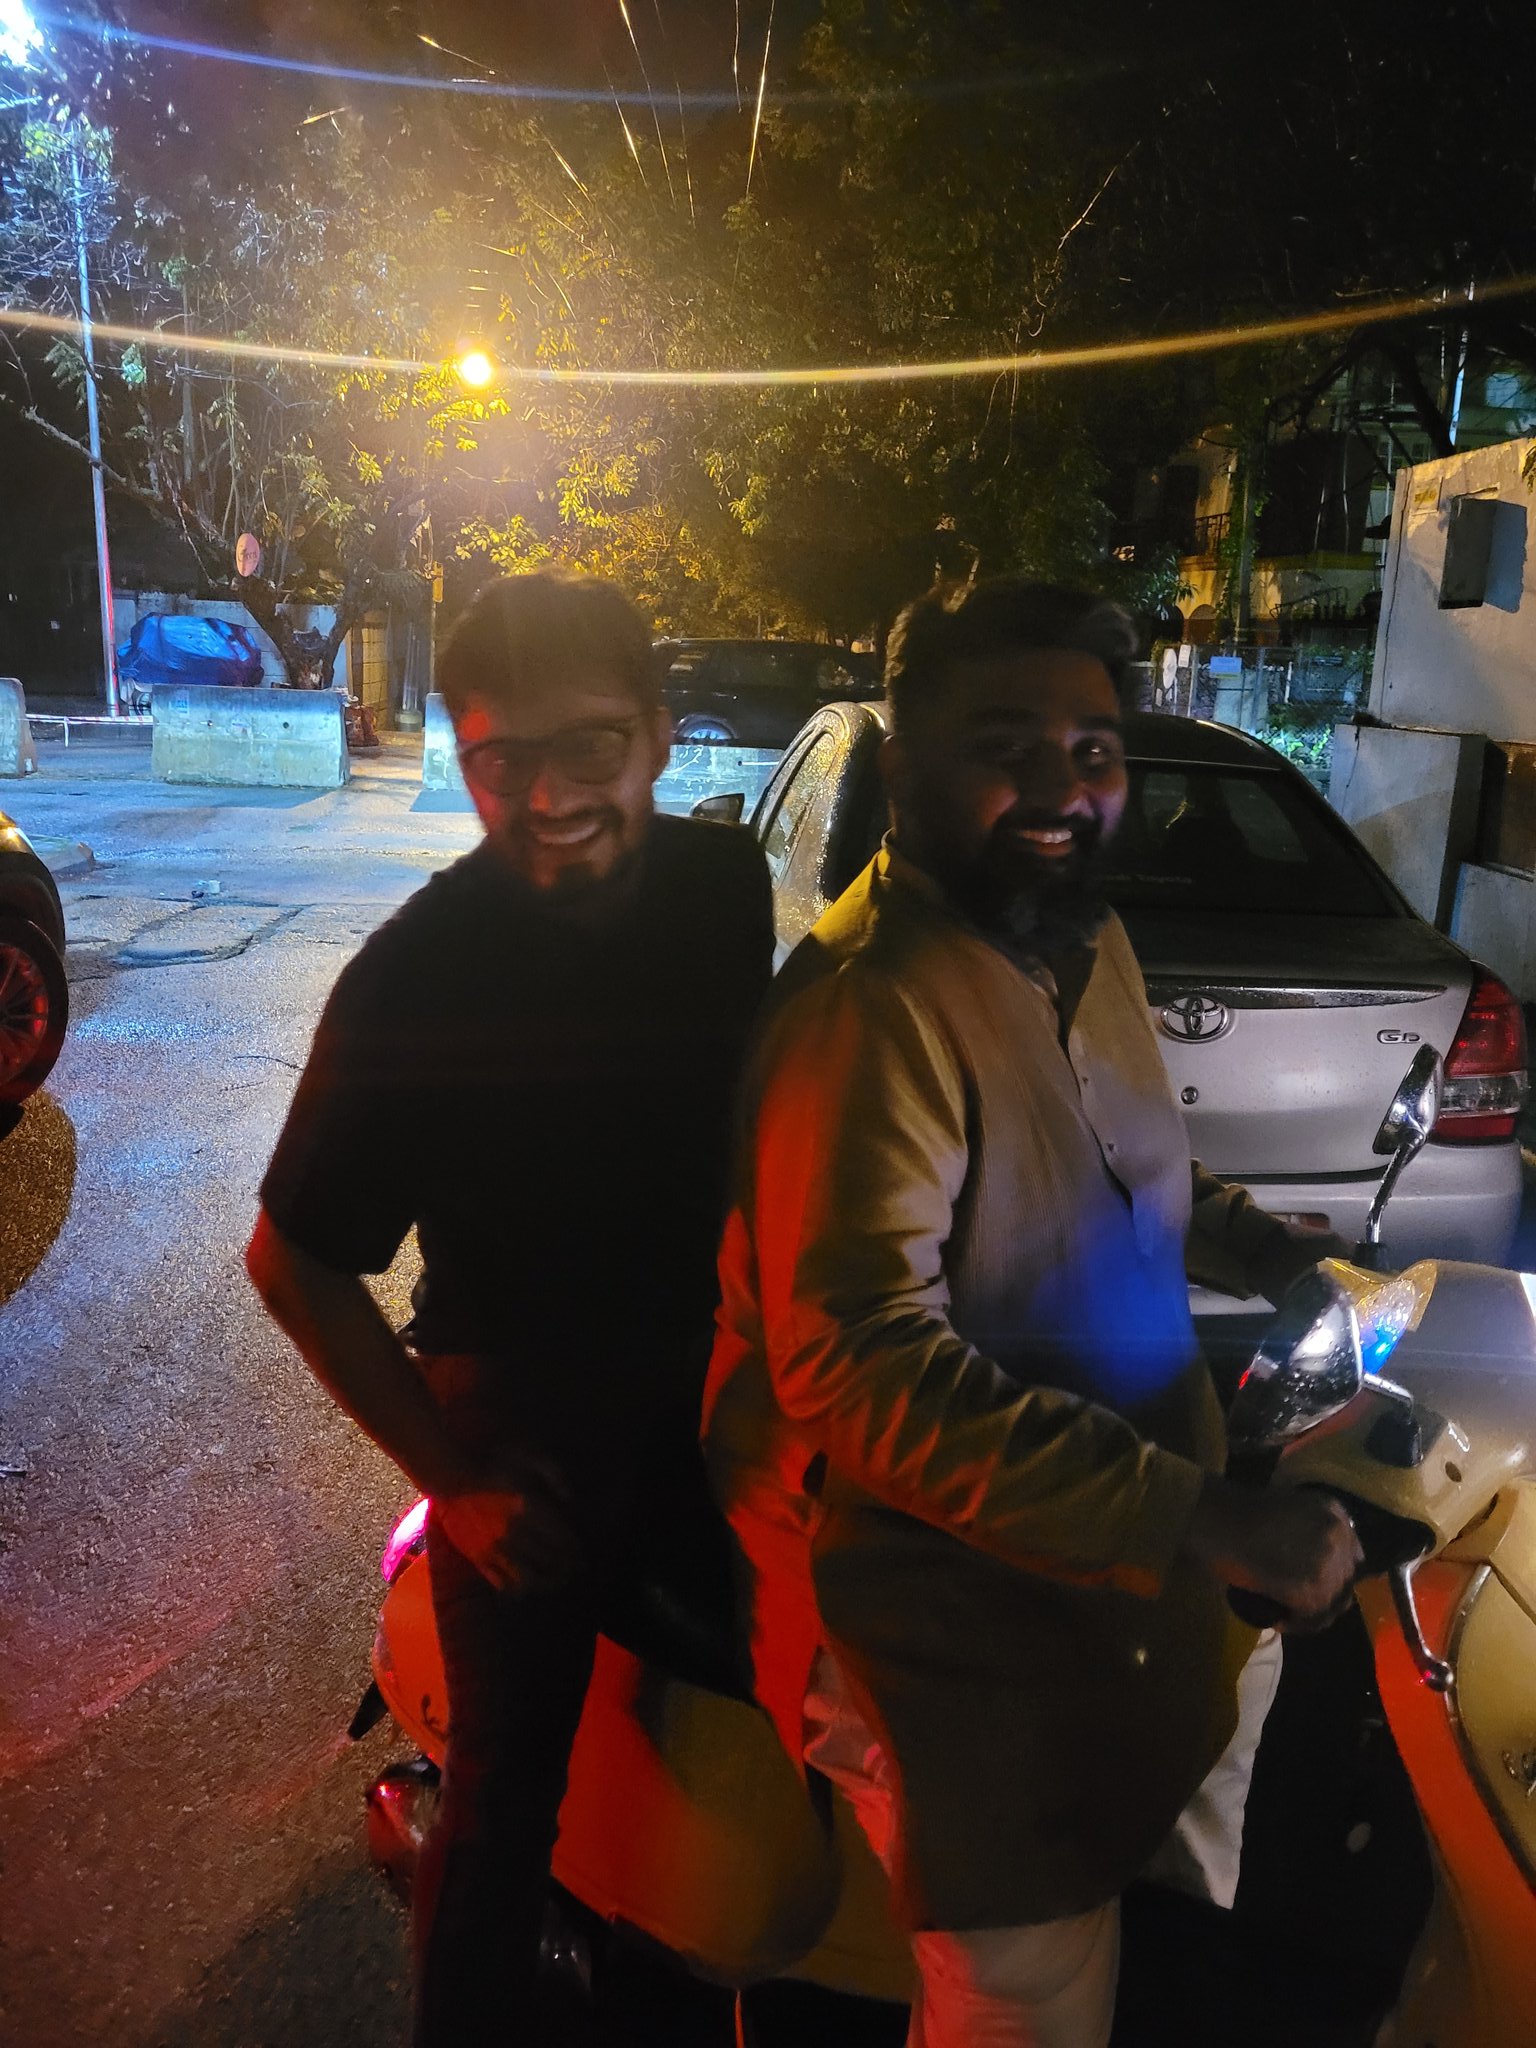 Jitendra on Twitter: "Spotted @kunalb11 and @tejeshwi_sharma on scooter at 4am on road. Could not imagine these 2 guys scooter i actually clicked them. https://t.co/tucezXtj6U" Twitter